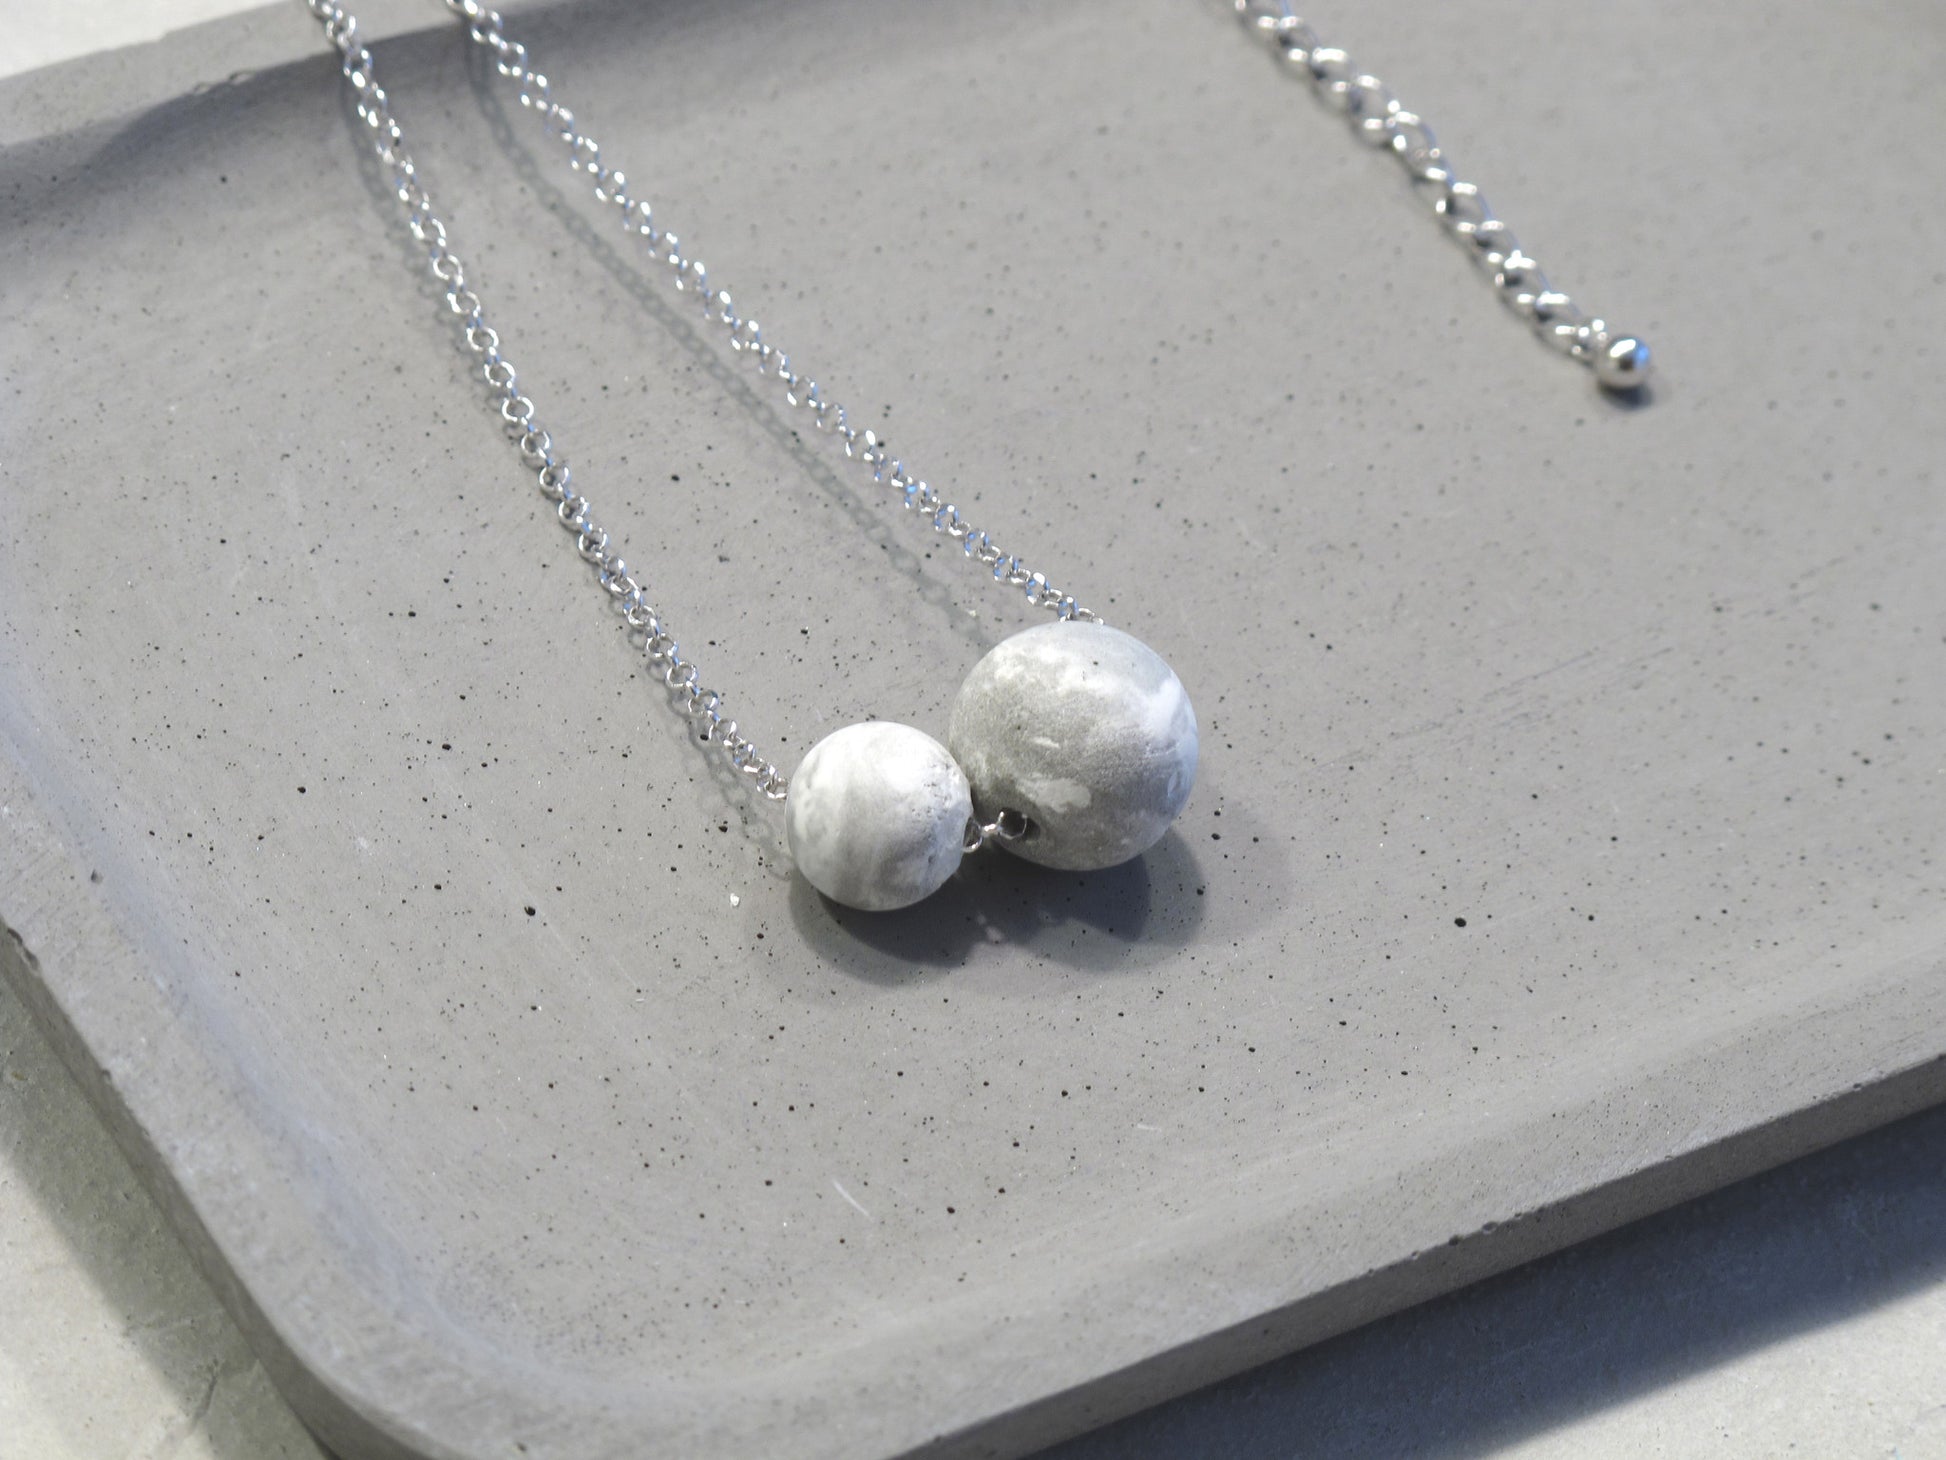 Minimal sterling silver necklace with Marbling concrete beads (Spheres)